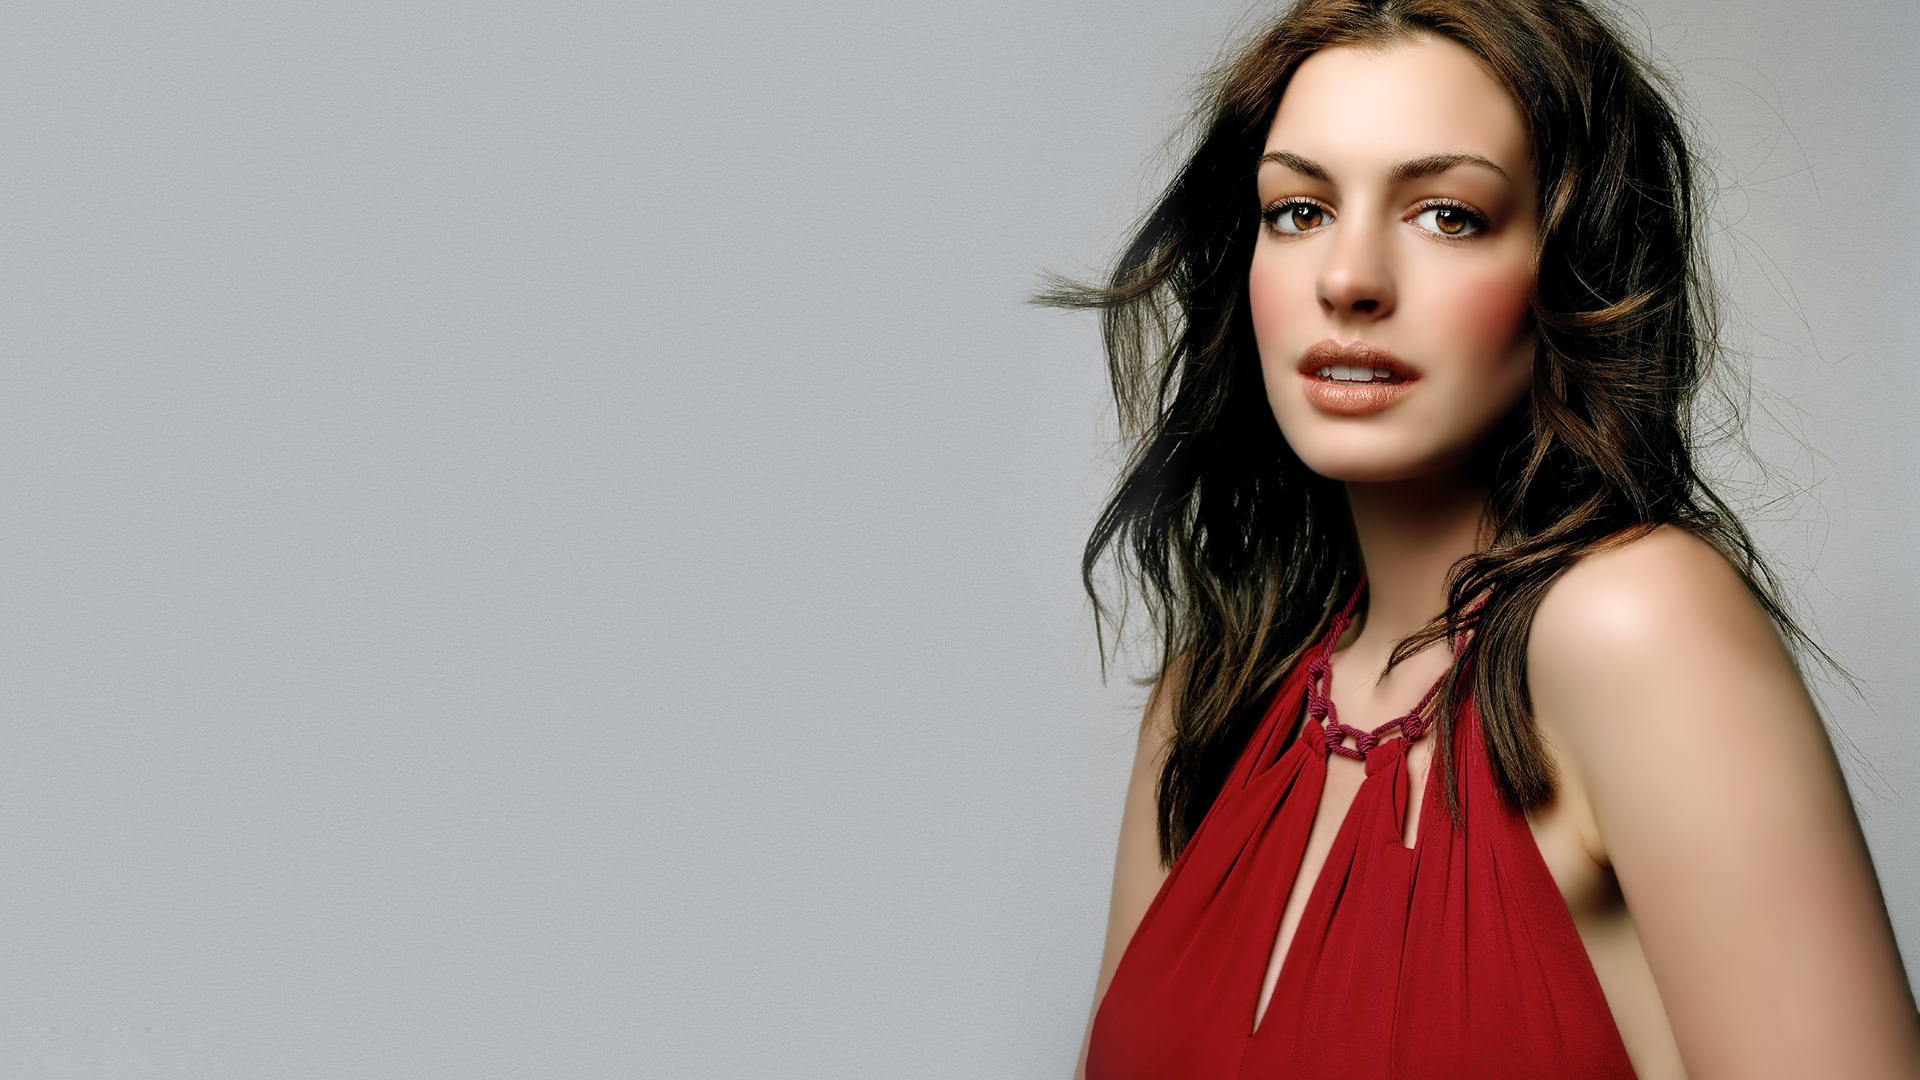 Gorgeous Anne Hathaway for 1920 x 1080 HDTV 1080p resolution